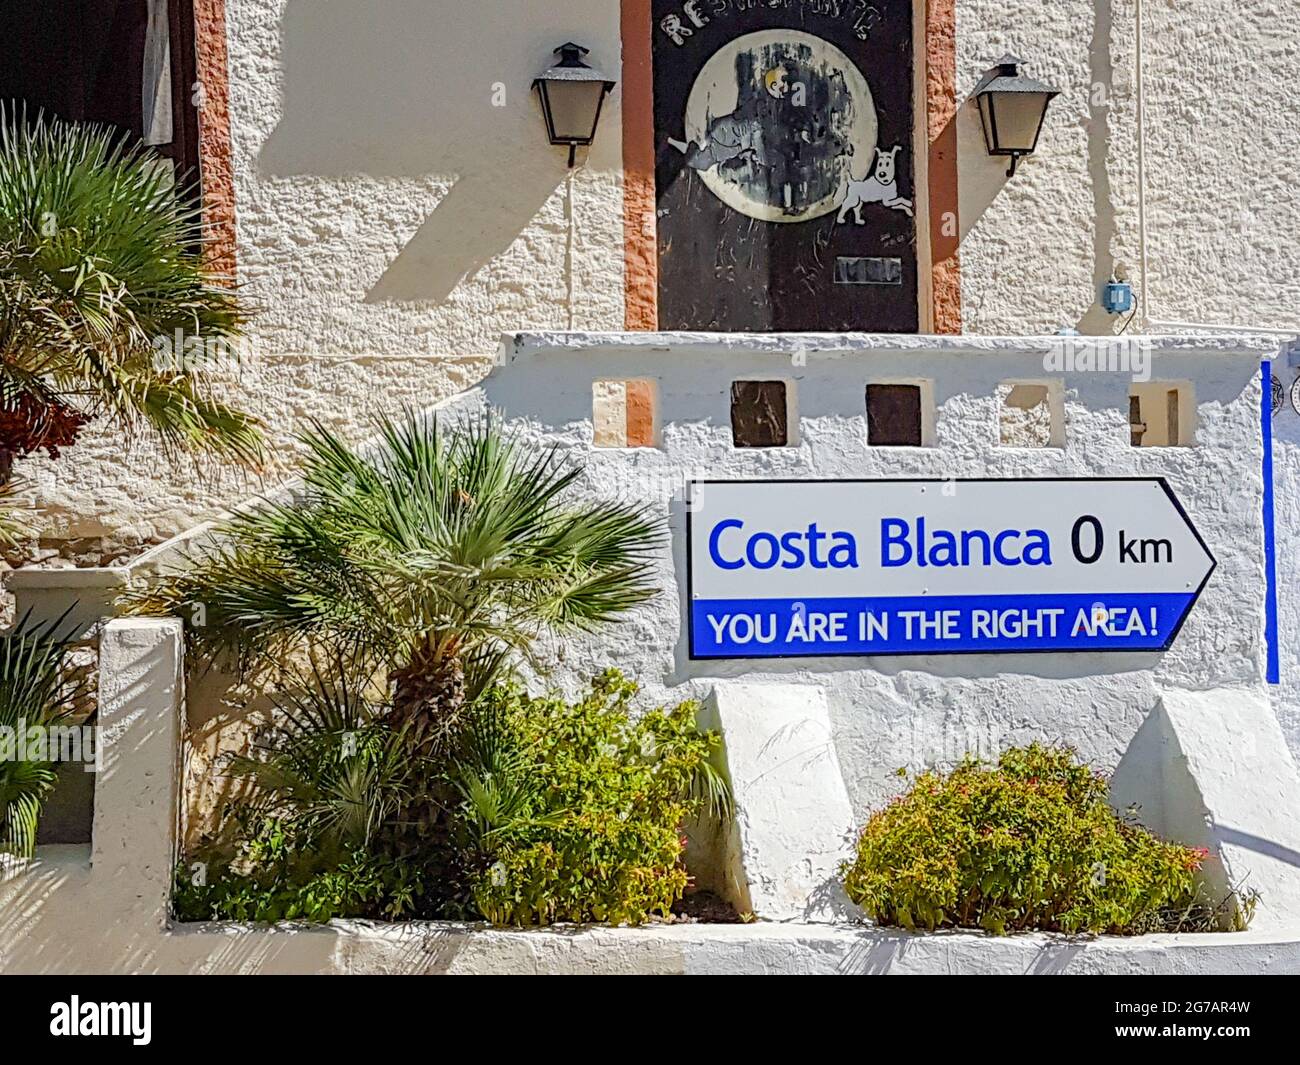 Calpe, Alicante, Spain - August 24 2016; Humorous sign advising distance of ) to Costa Blanca in coasta town Calpe, Alicante, Spain on exterior of bui Stock Photo